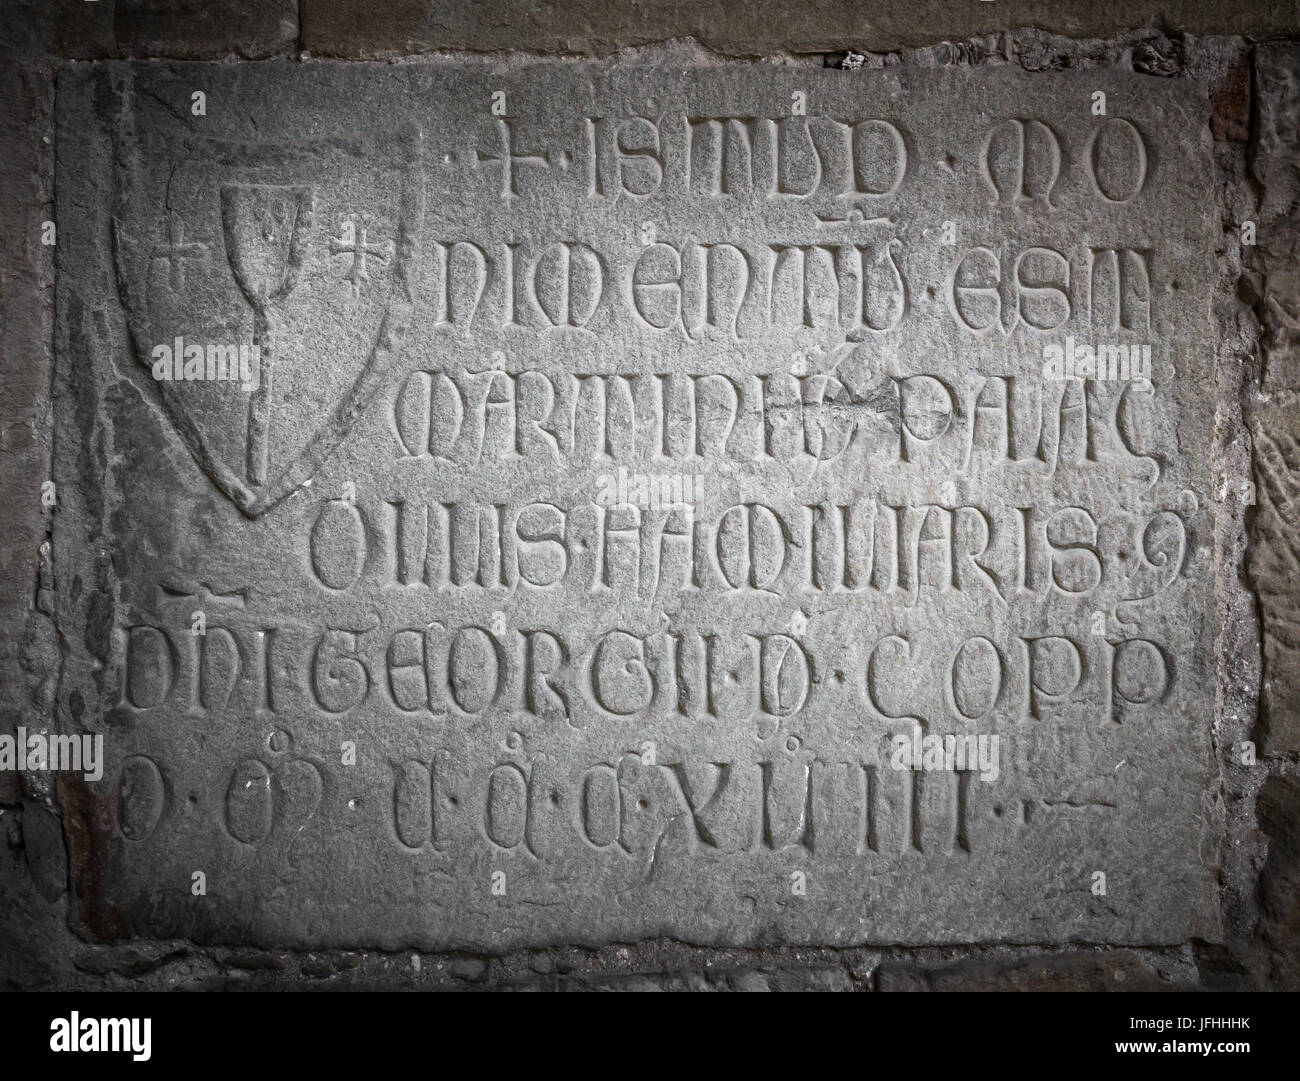 engraved-stone-with-latin-letters-JFHHHK.jpg